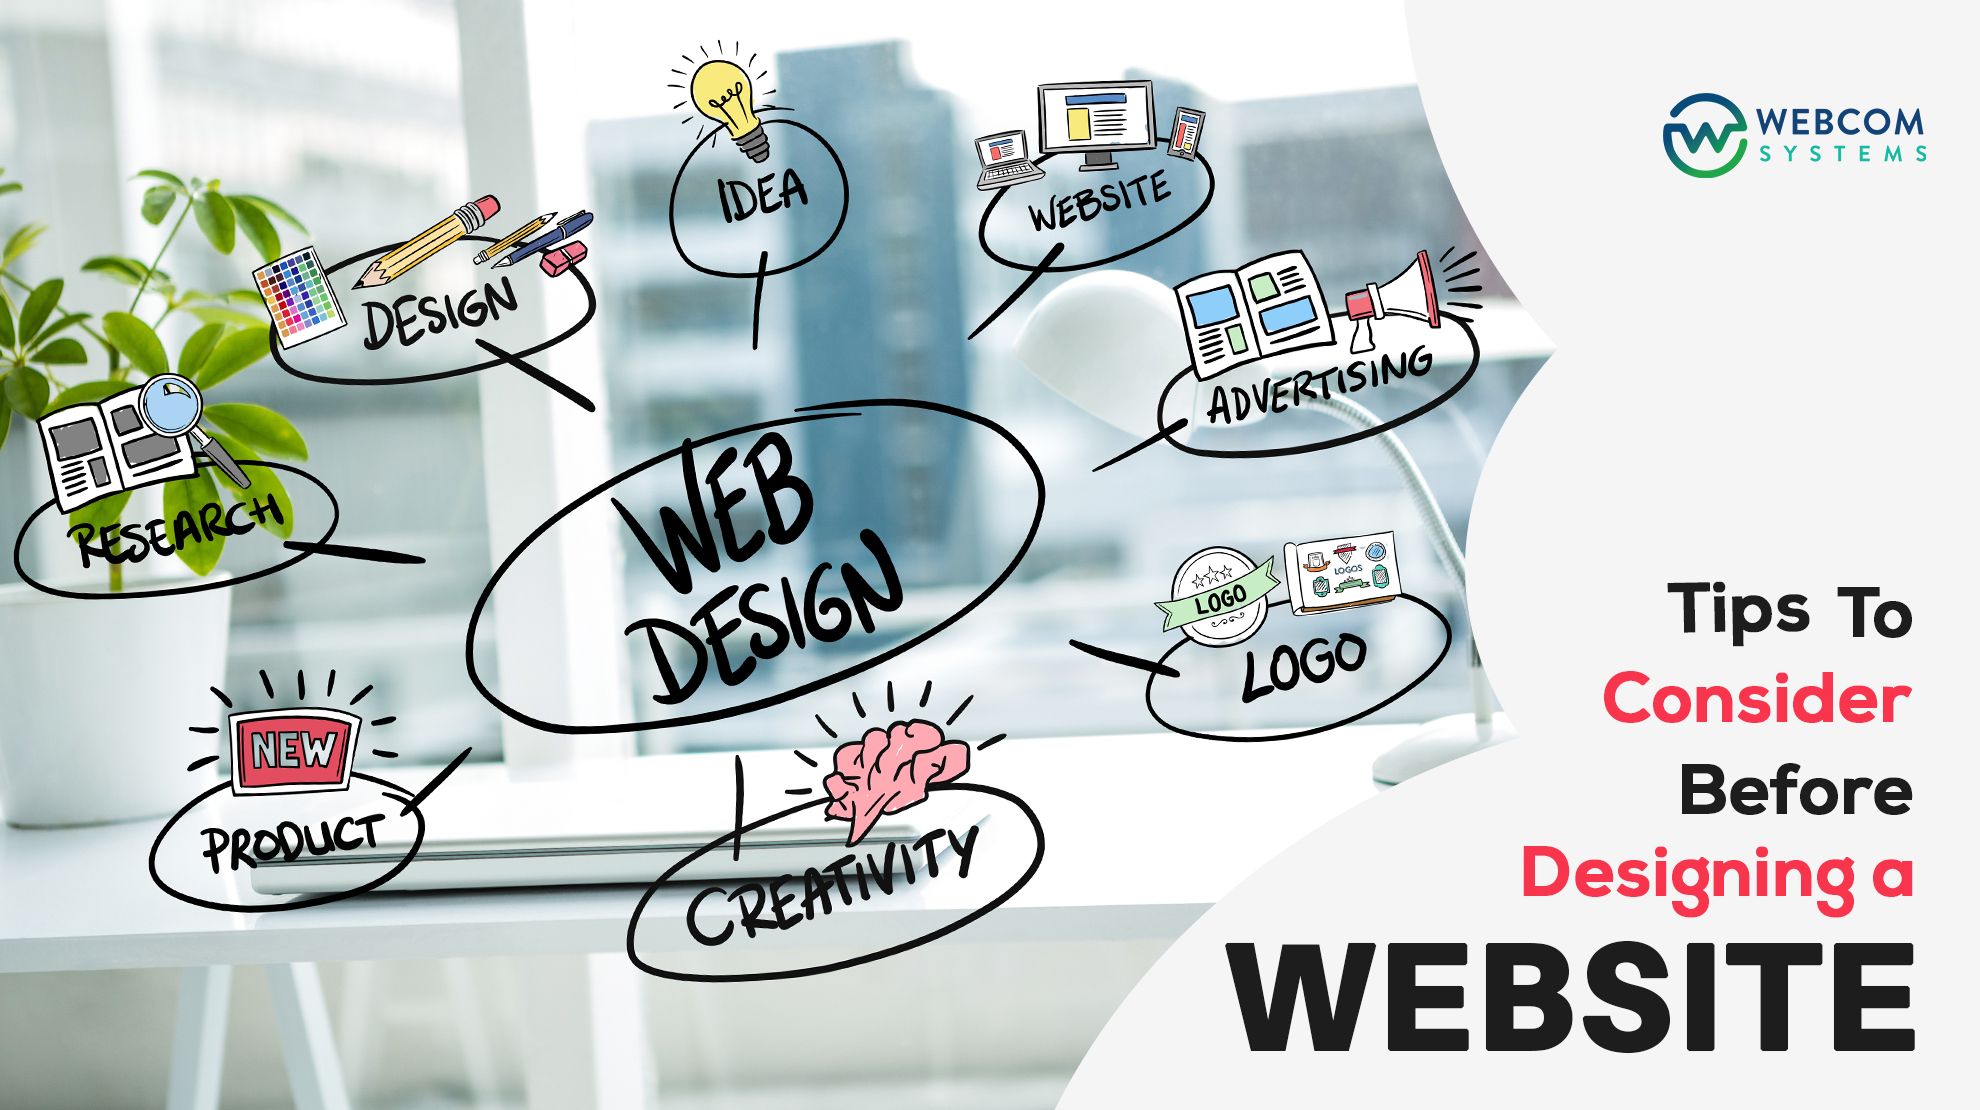 Tips To Consider Before Designing A Website